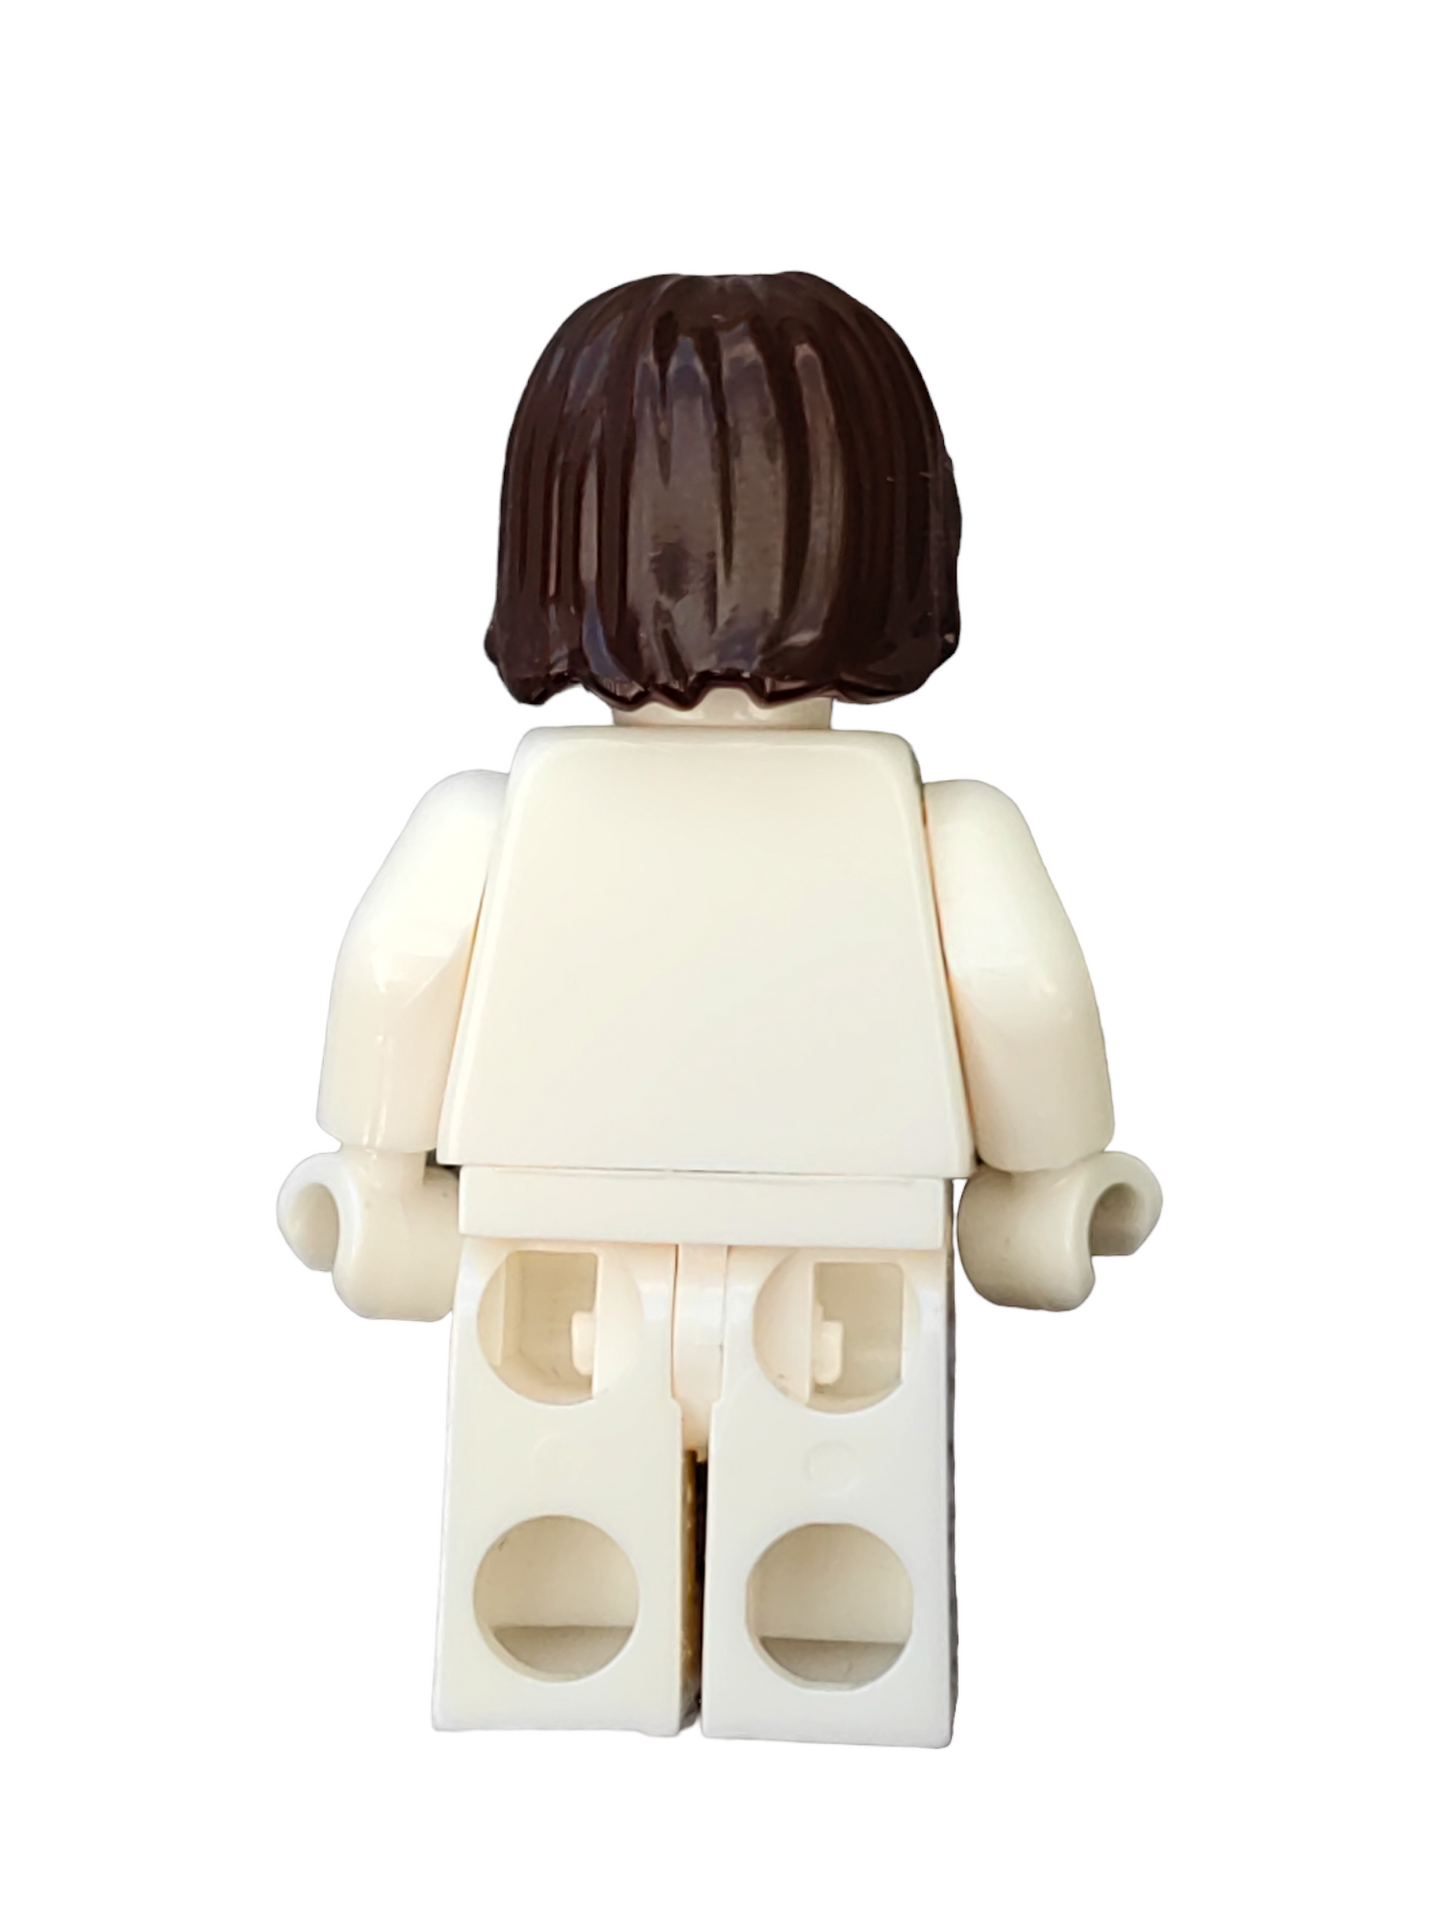 LEGO Wig, Dark Brown Hair Medium Length with Middle Parting - UB1311